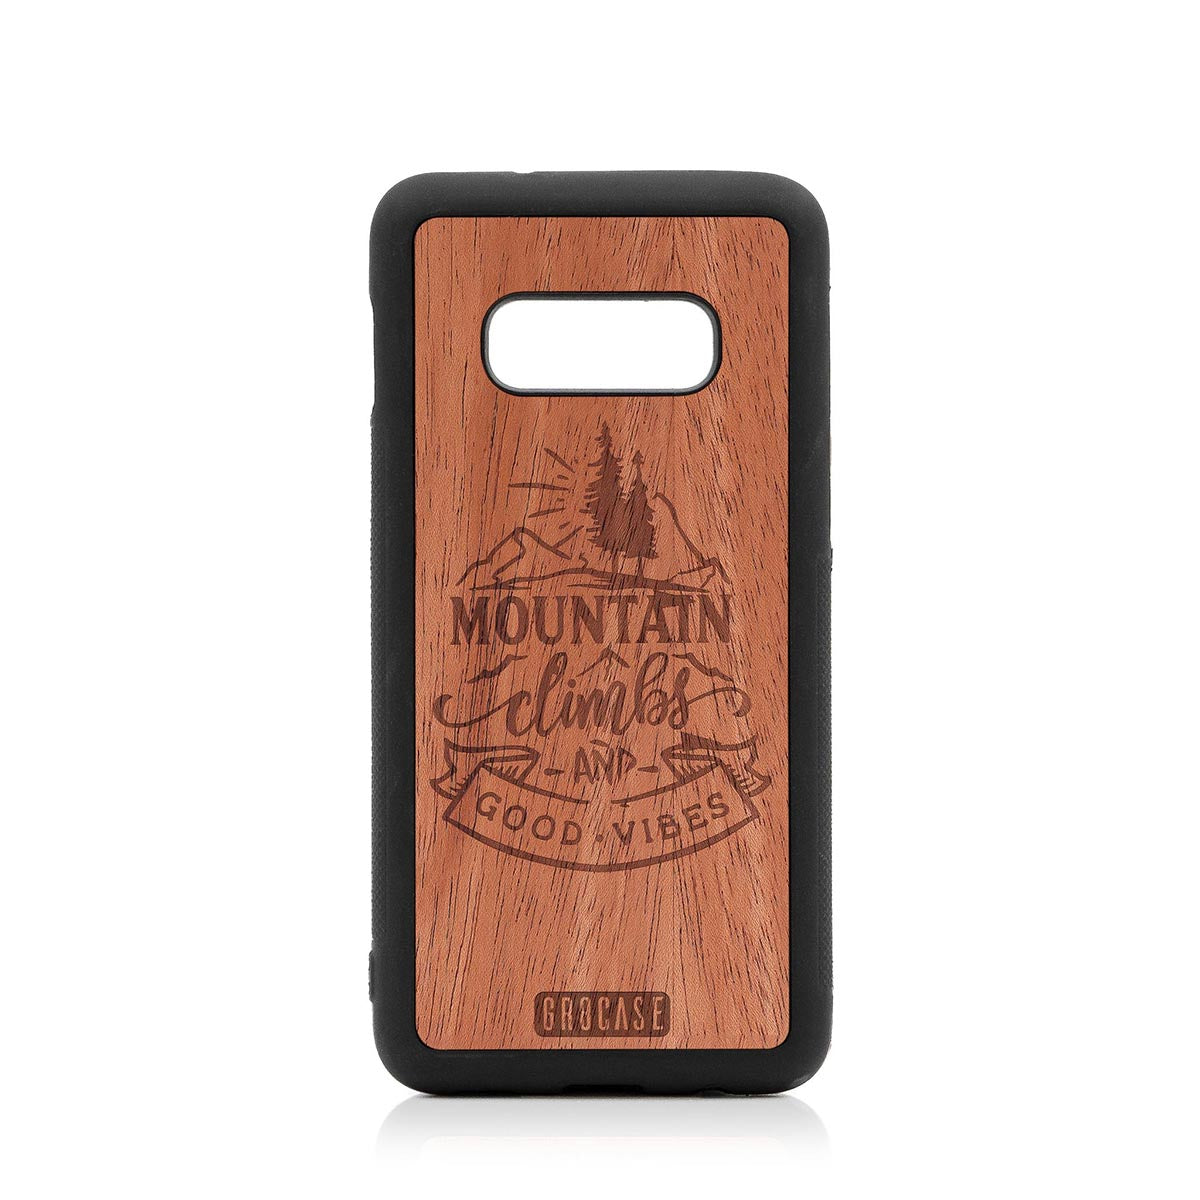 Mountain Climbs And Good Vibes Design Wood Case Samsung Galaxy S10E by GR8CASE